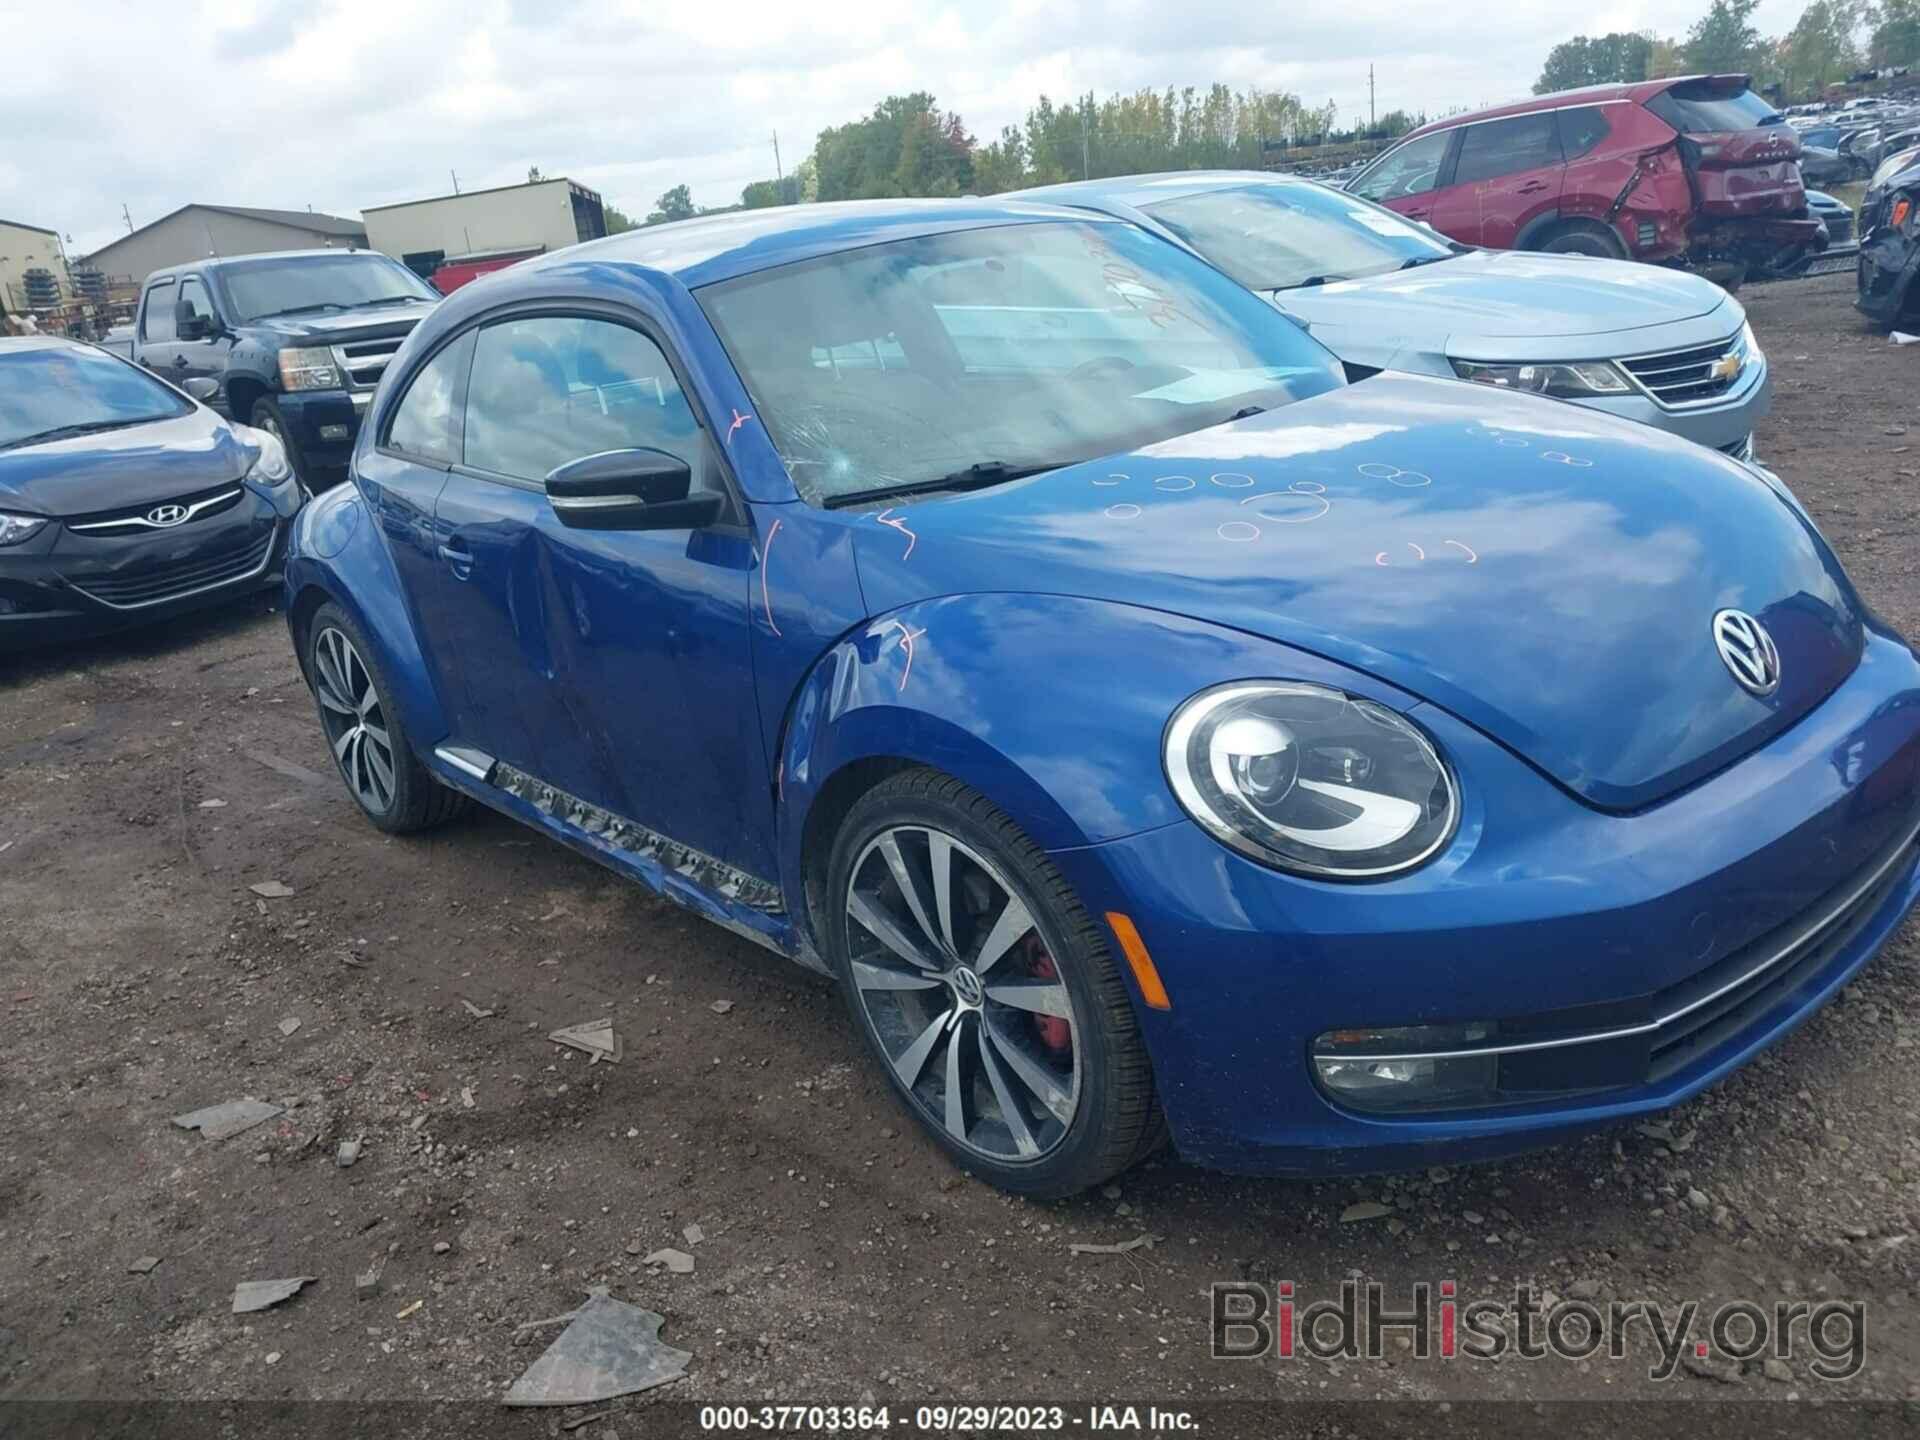 Photo 3VW4A7AT3CM645255 - VOLKSWAGEN BEETLE 2012